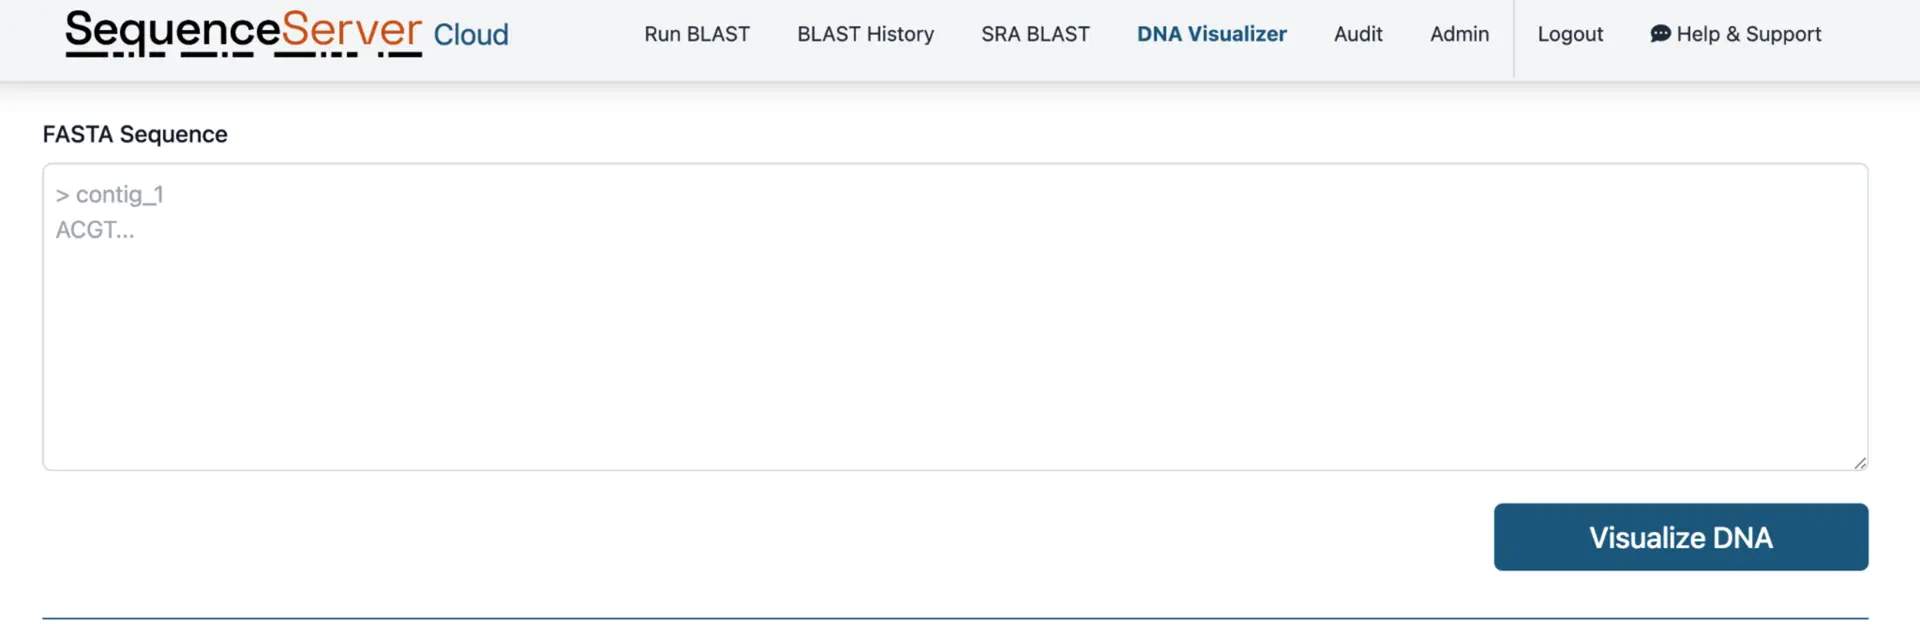 Input just a single FASTA sequence for analysis to get feature annotations like genes and restriction enzyme sites